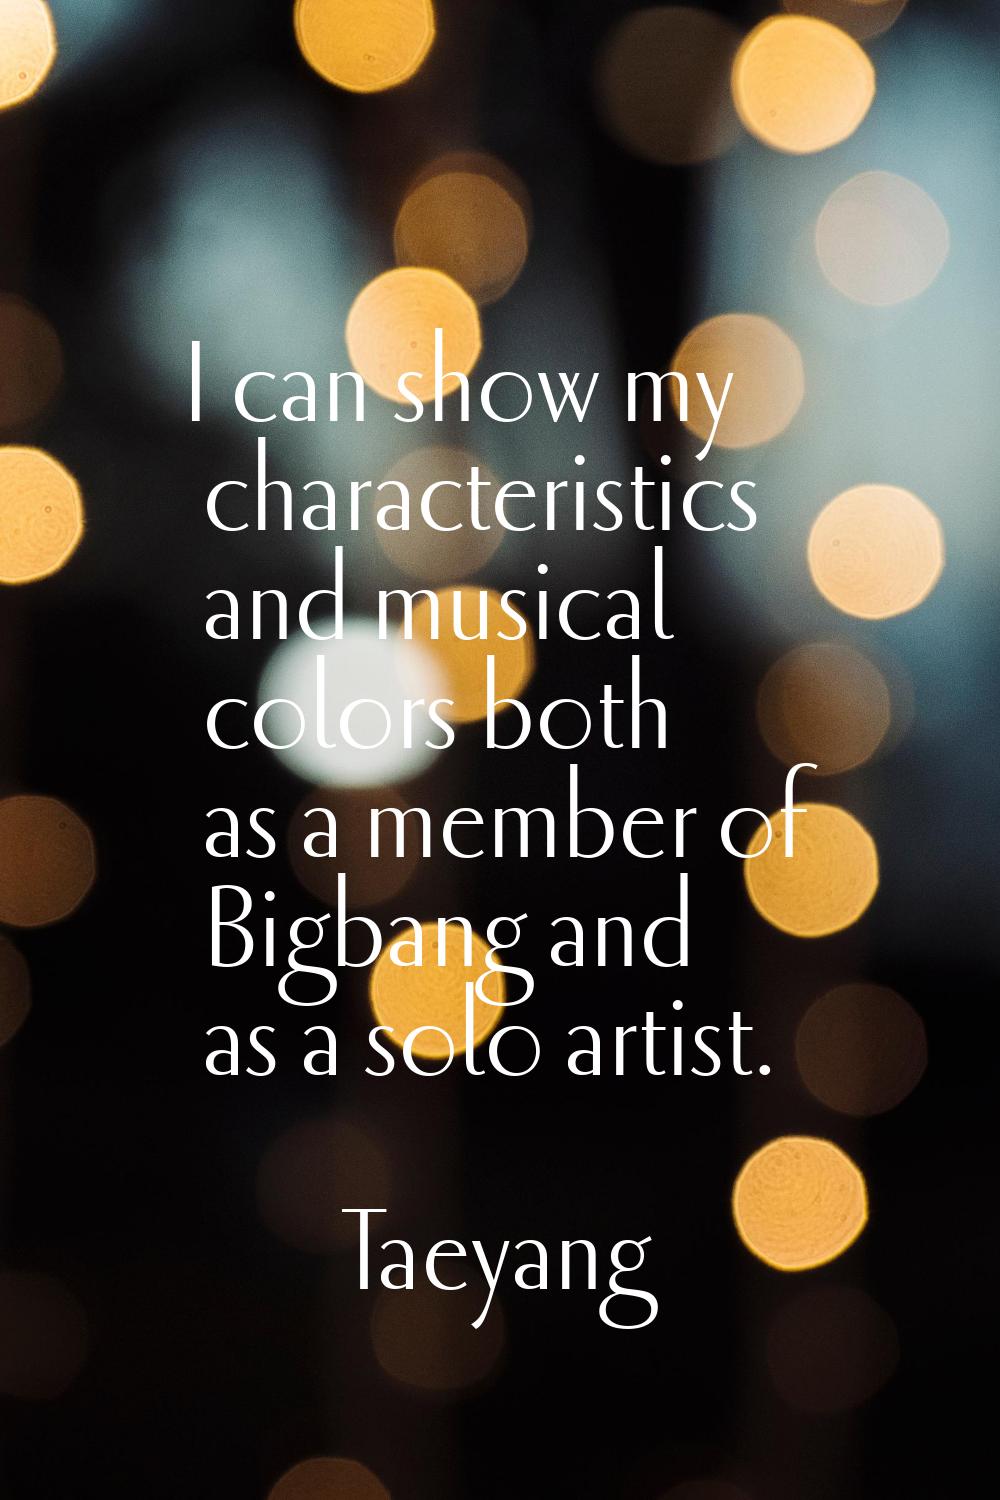 I can show my characteristics and musical colors both as a member of Bigbang and as a solo artist.